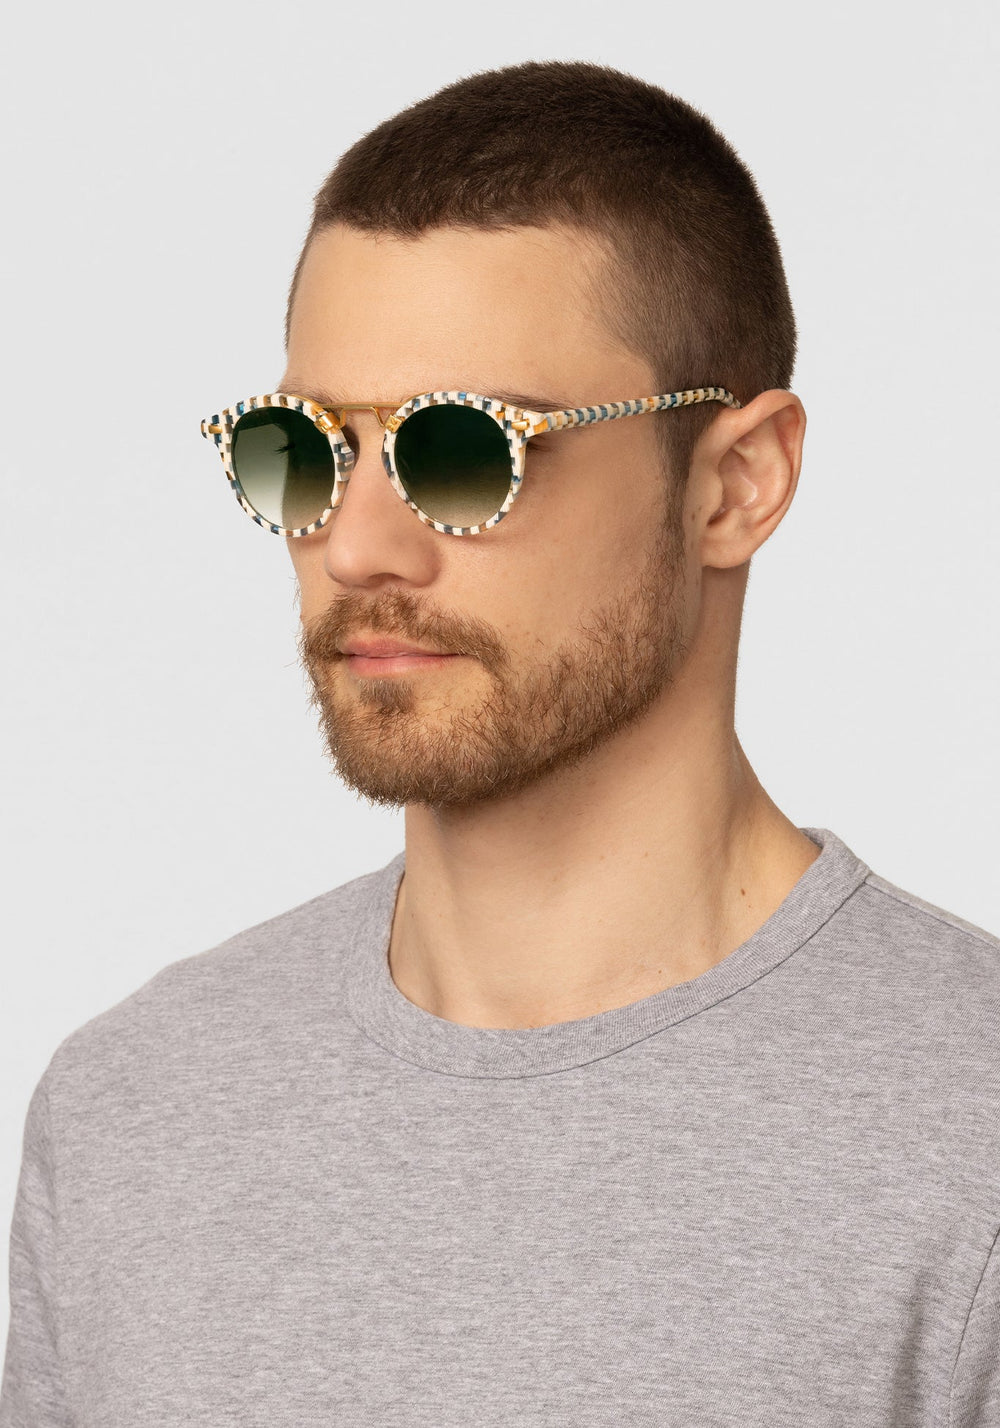 KREWE - Designer Round Sunglasses - ST. LOUIS CLASSICS | Pincheck 18K Handcrafted, luxury blue and white checkered acetate round sunglasses with a double metal bridge. A bestseller. Oliver Peoples Sunglasses, Moscot sunglasses mens model | Model: David